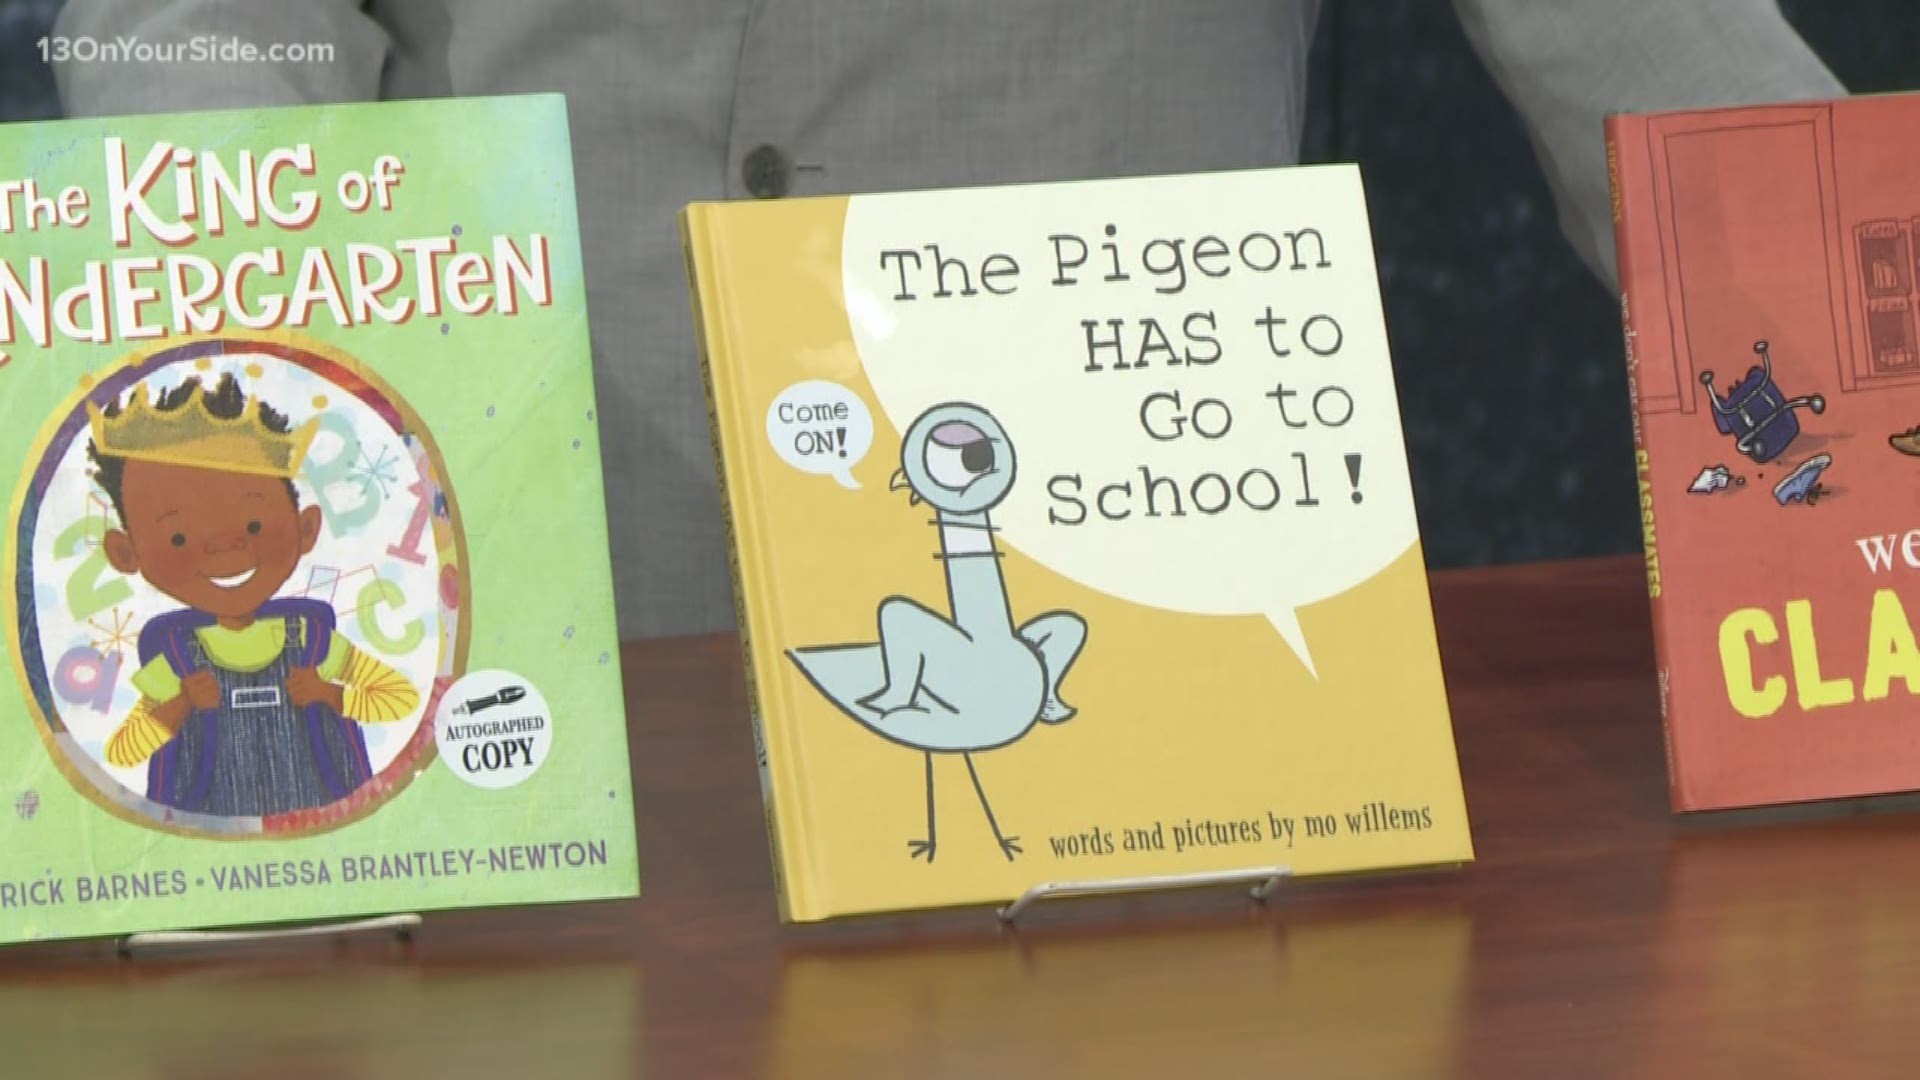 Getting back into the swing of things at the start of the school year can be challenging for some kids. Samantha Hendricks from Schuler Books & Music stopped by with a few suggestions to help ease the challenge of getting back to school.